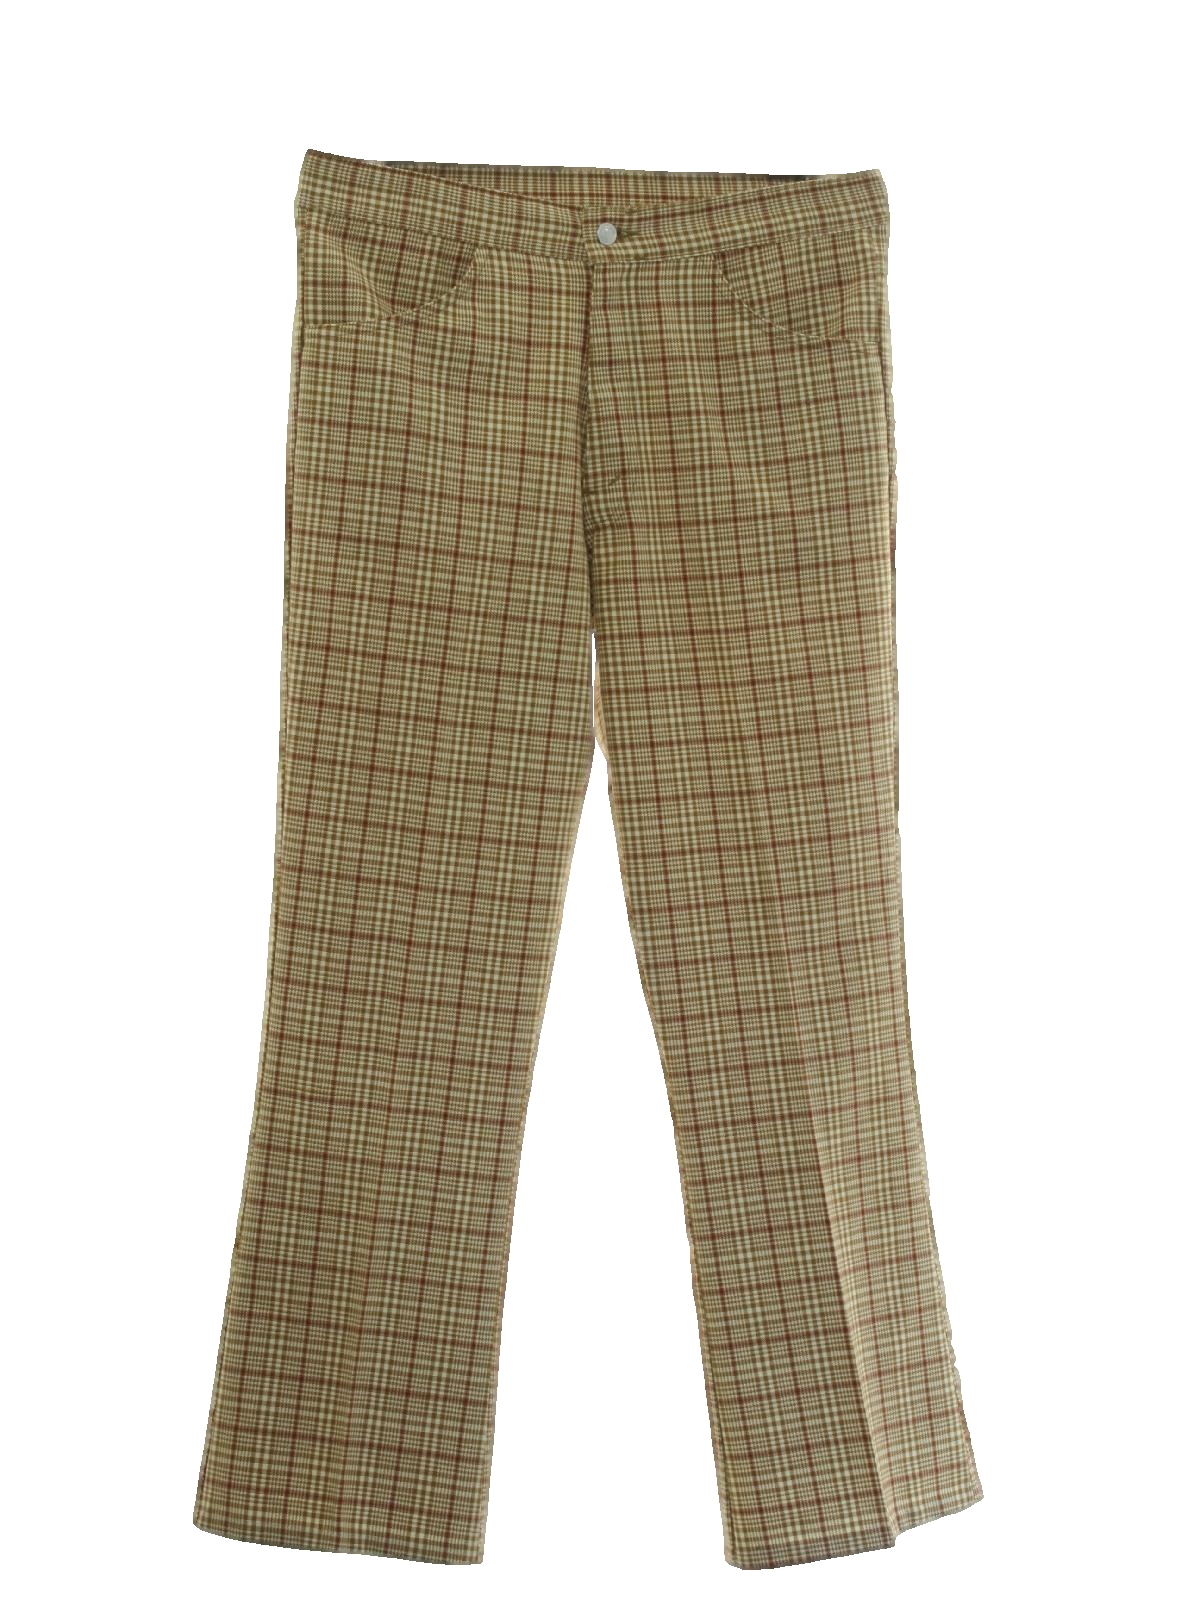 Retro 1960's Flared Pants / Flares: Late 60s -No Label- Mens pale ...